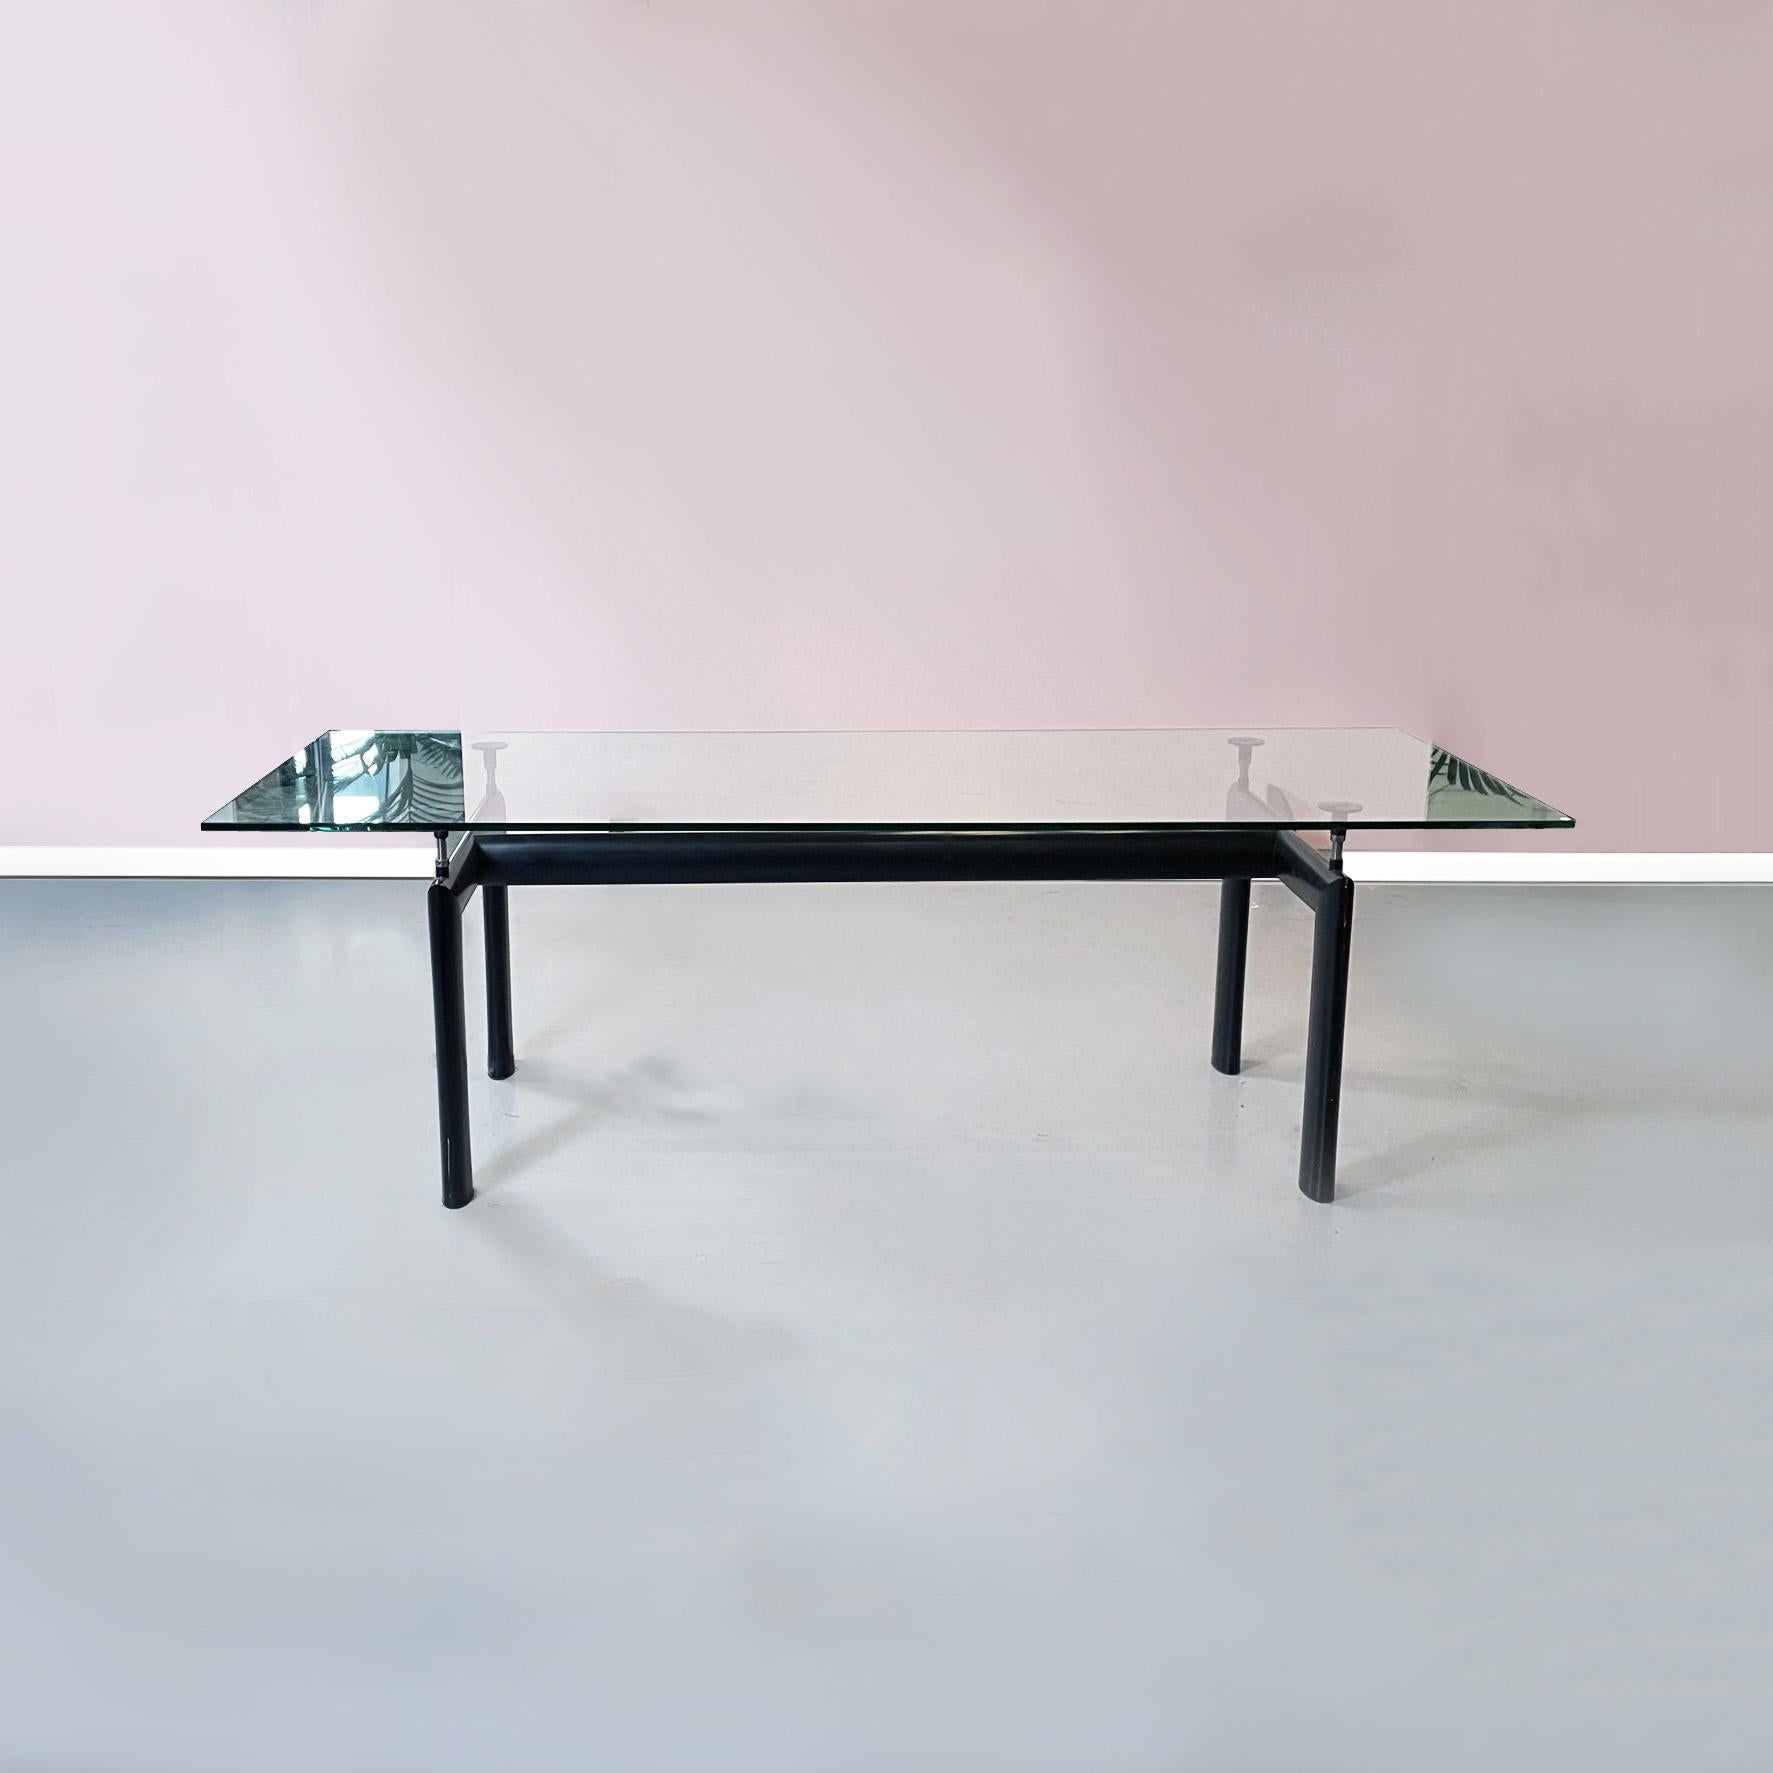 Italian mid-century LC6 table by Le Corbusier, Jeanneret and Perriand for Cassina, 1980s
LC6 rectangular dining table with glass piano and oval structure in black painted steel. The glass piano has rounded corners.
Produced by Cassina in 1980s and